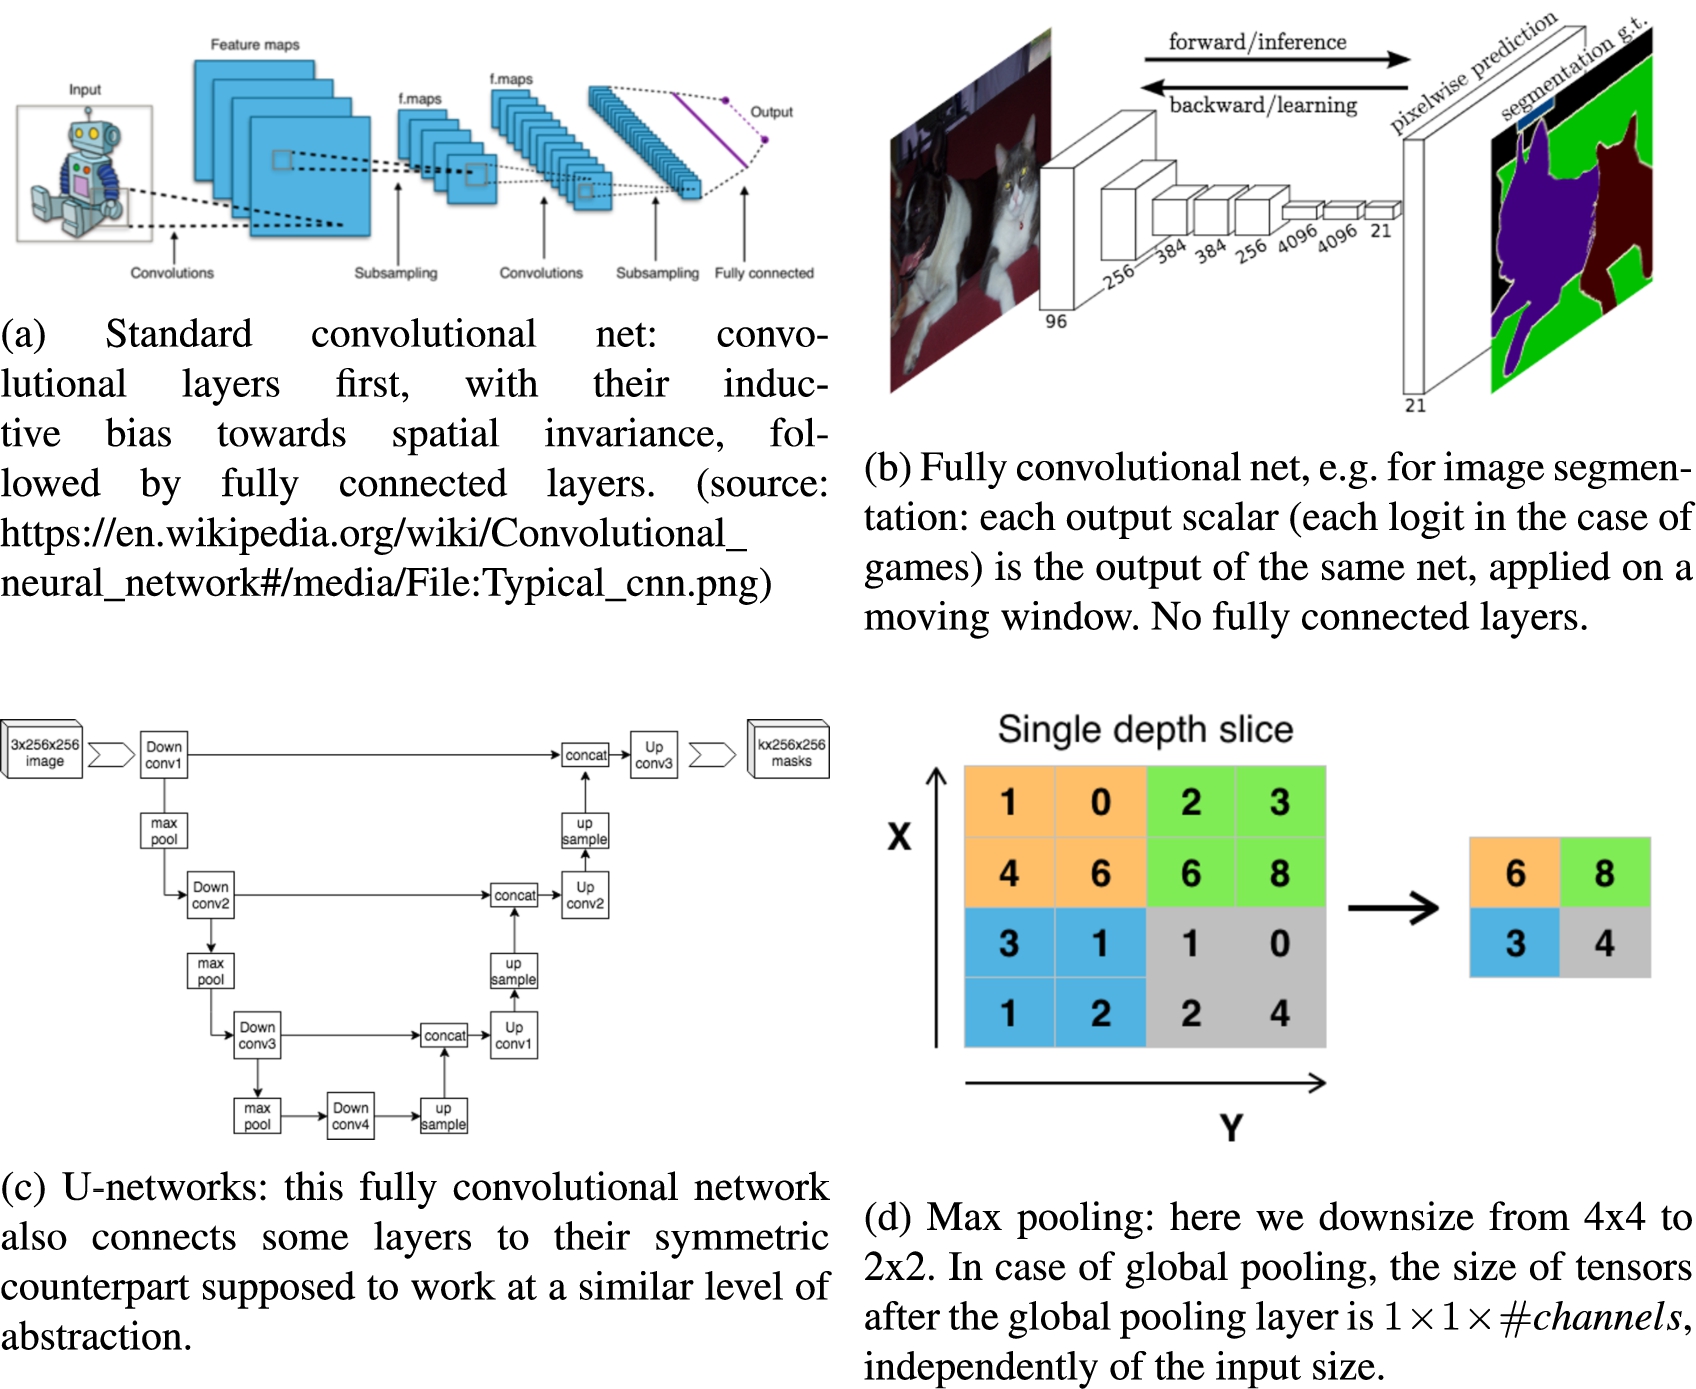 Convolutional neural network (a). Fully convolutional counterpart (b, image from (Shelhamer et al., 2017); other images from Wikipedia), typically used in image segmentation: image segmentation is related to policy heads in games in that the output has the same spatial coordinates at the input. U-networks (C): only convolutional layers, and skip connections symmetrically connecting layers. Global pooling (d): here we down-sample to a spatial size 1x1 in the value head: this is boardsize invariant. Global pooling can use channels for mean, standard deviation, max, etc: the number of channels is not necessarily preserved. (B+d) or (c+d) allow boardsize-invariant training (Cazenave et al., 2020).